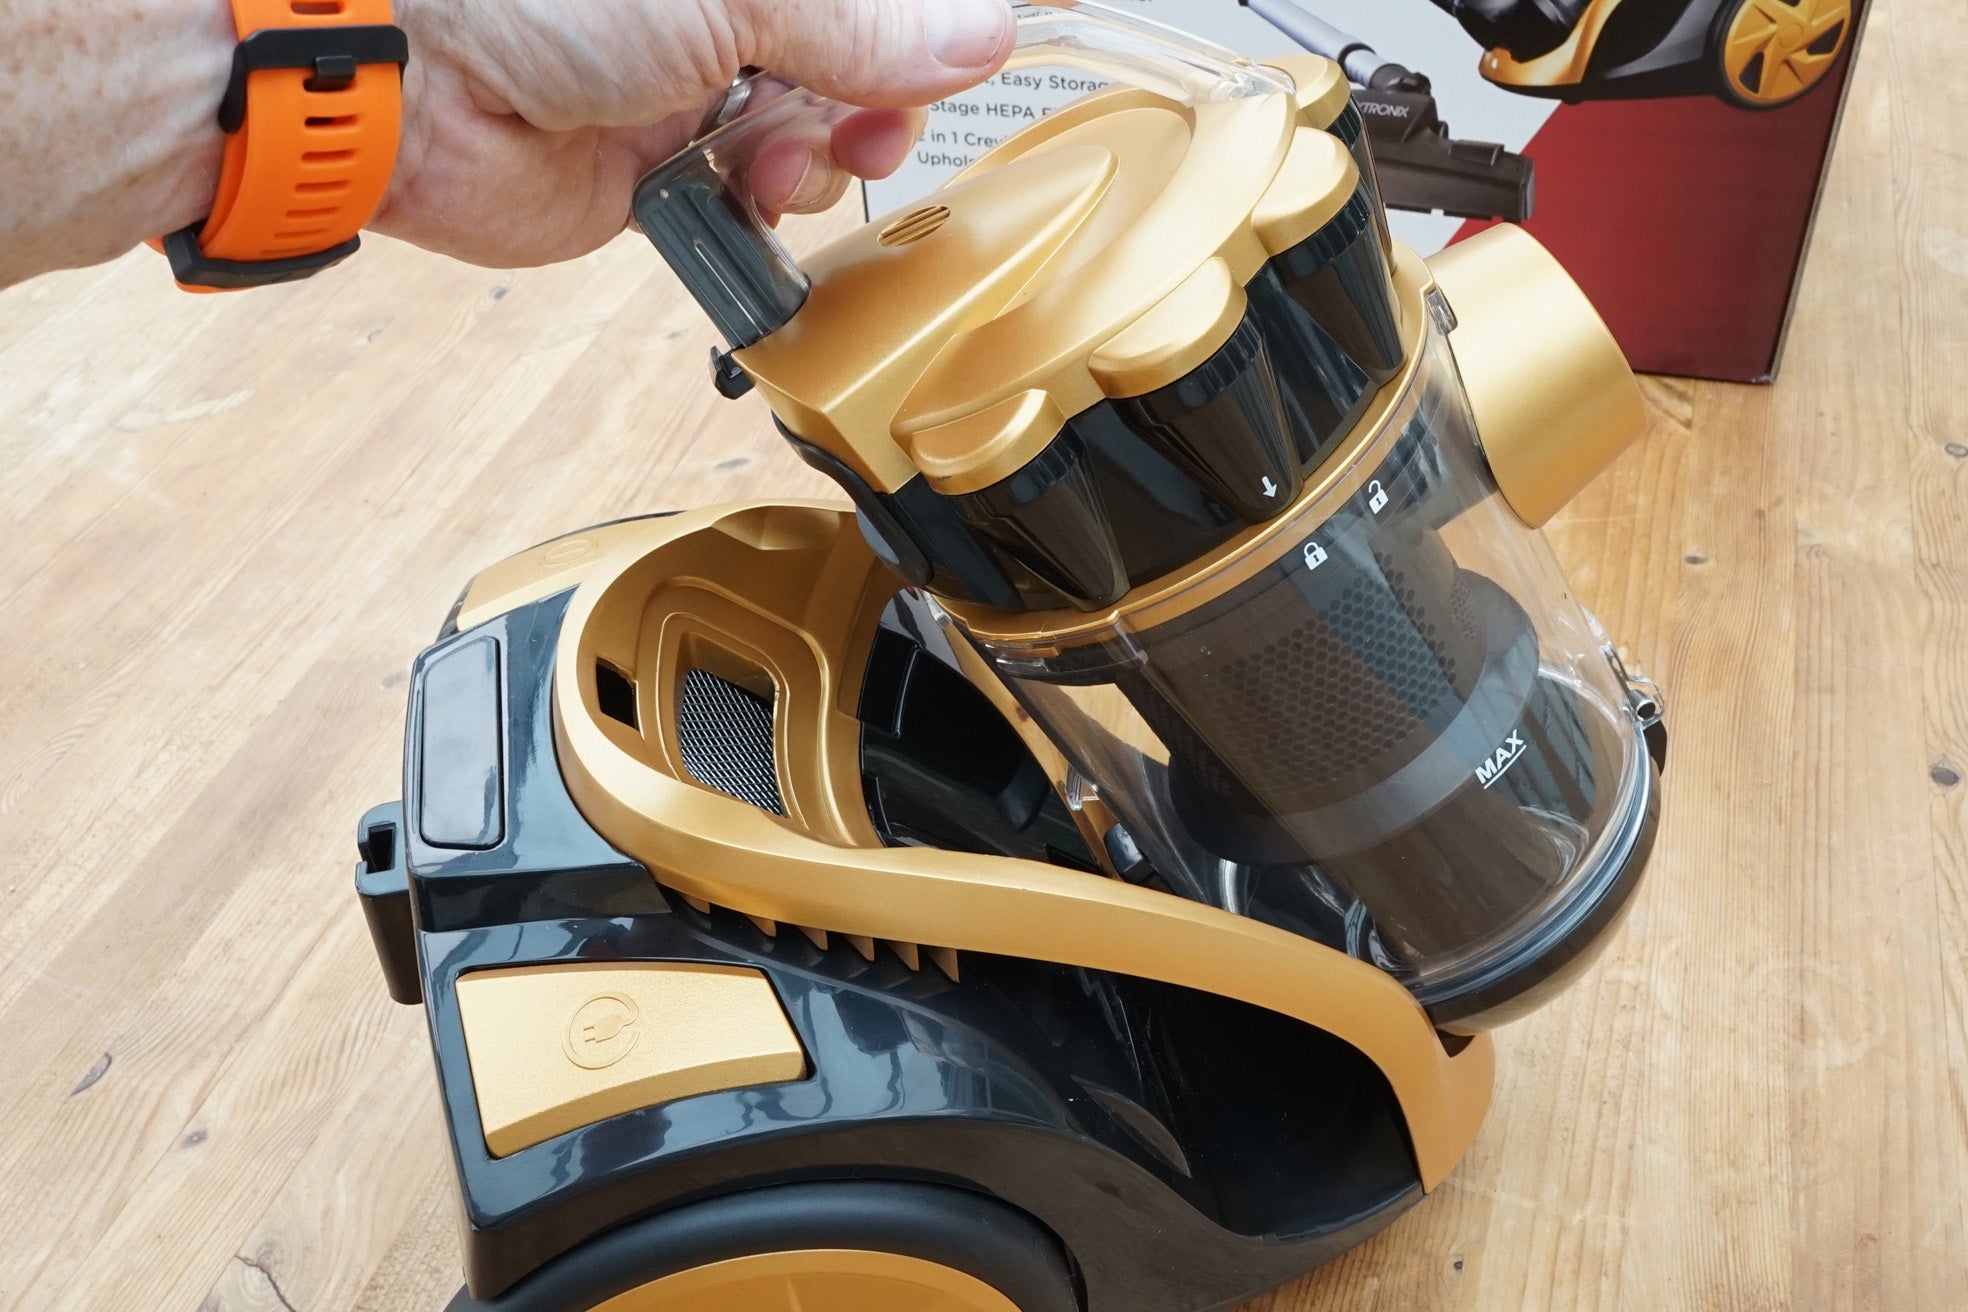 Hand removing HEPA filter from Vytronix VTBC01 vacuum cleaner on wooden floor.